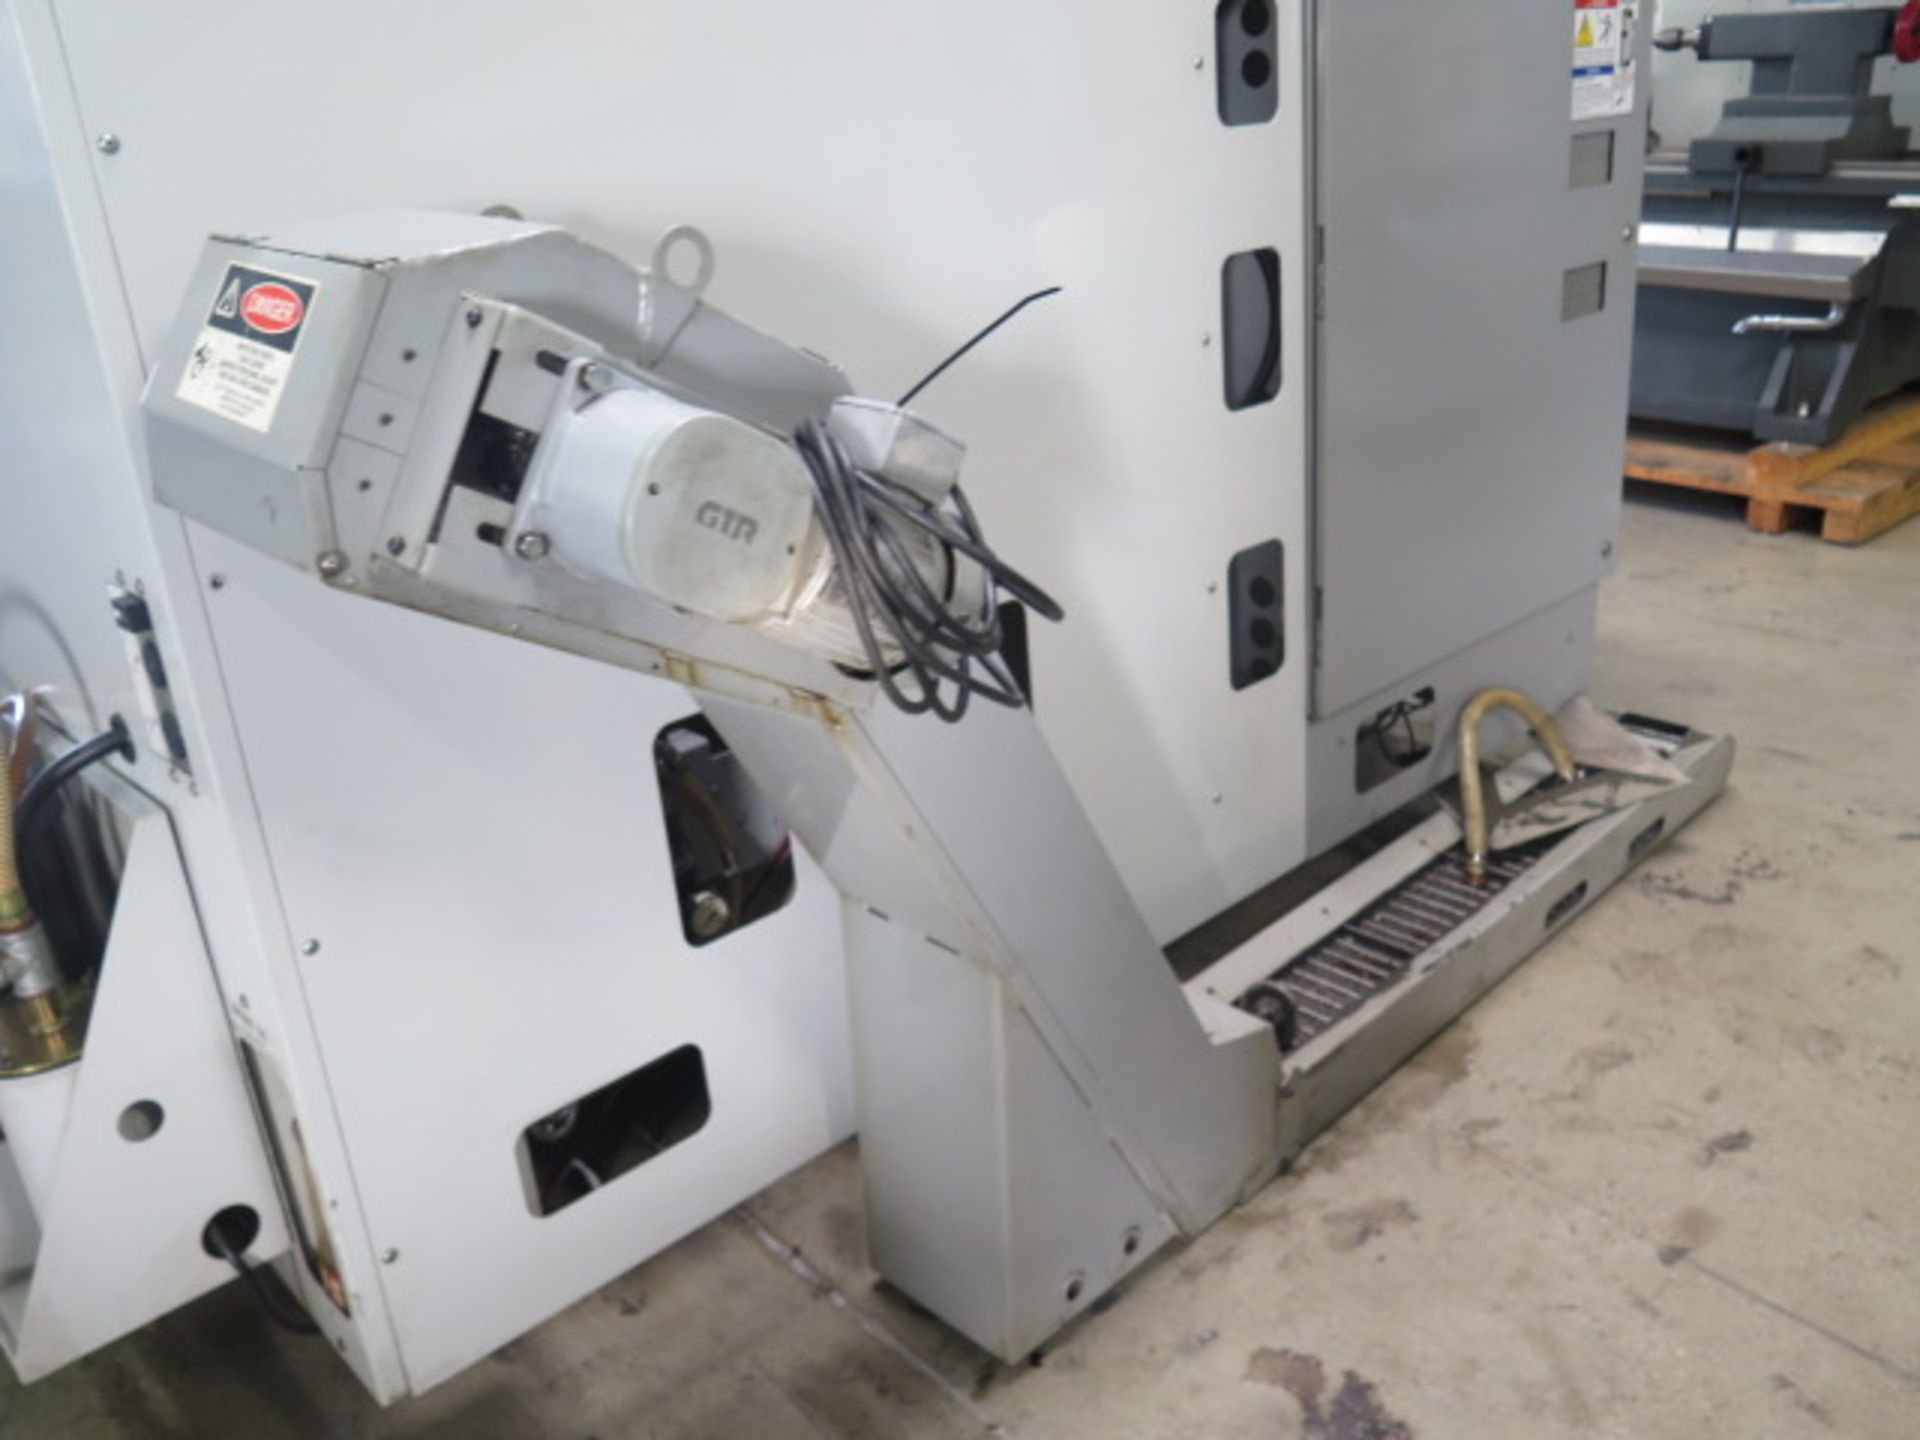 2006 Haas SL-20T CNC turning center s/n 3082959, 12-Station Turret, Tailstock, SOLD AS IS - Image 14 of 15